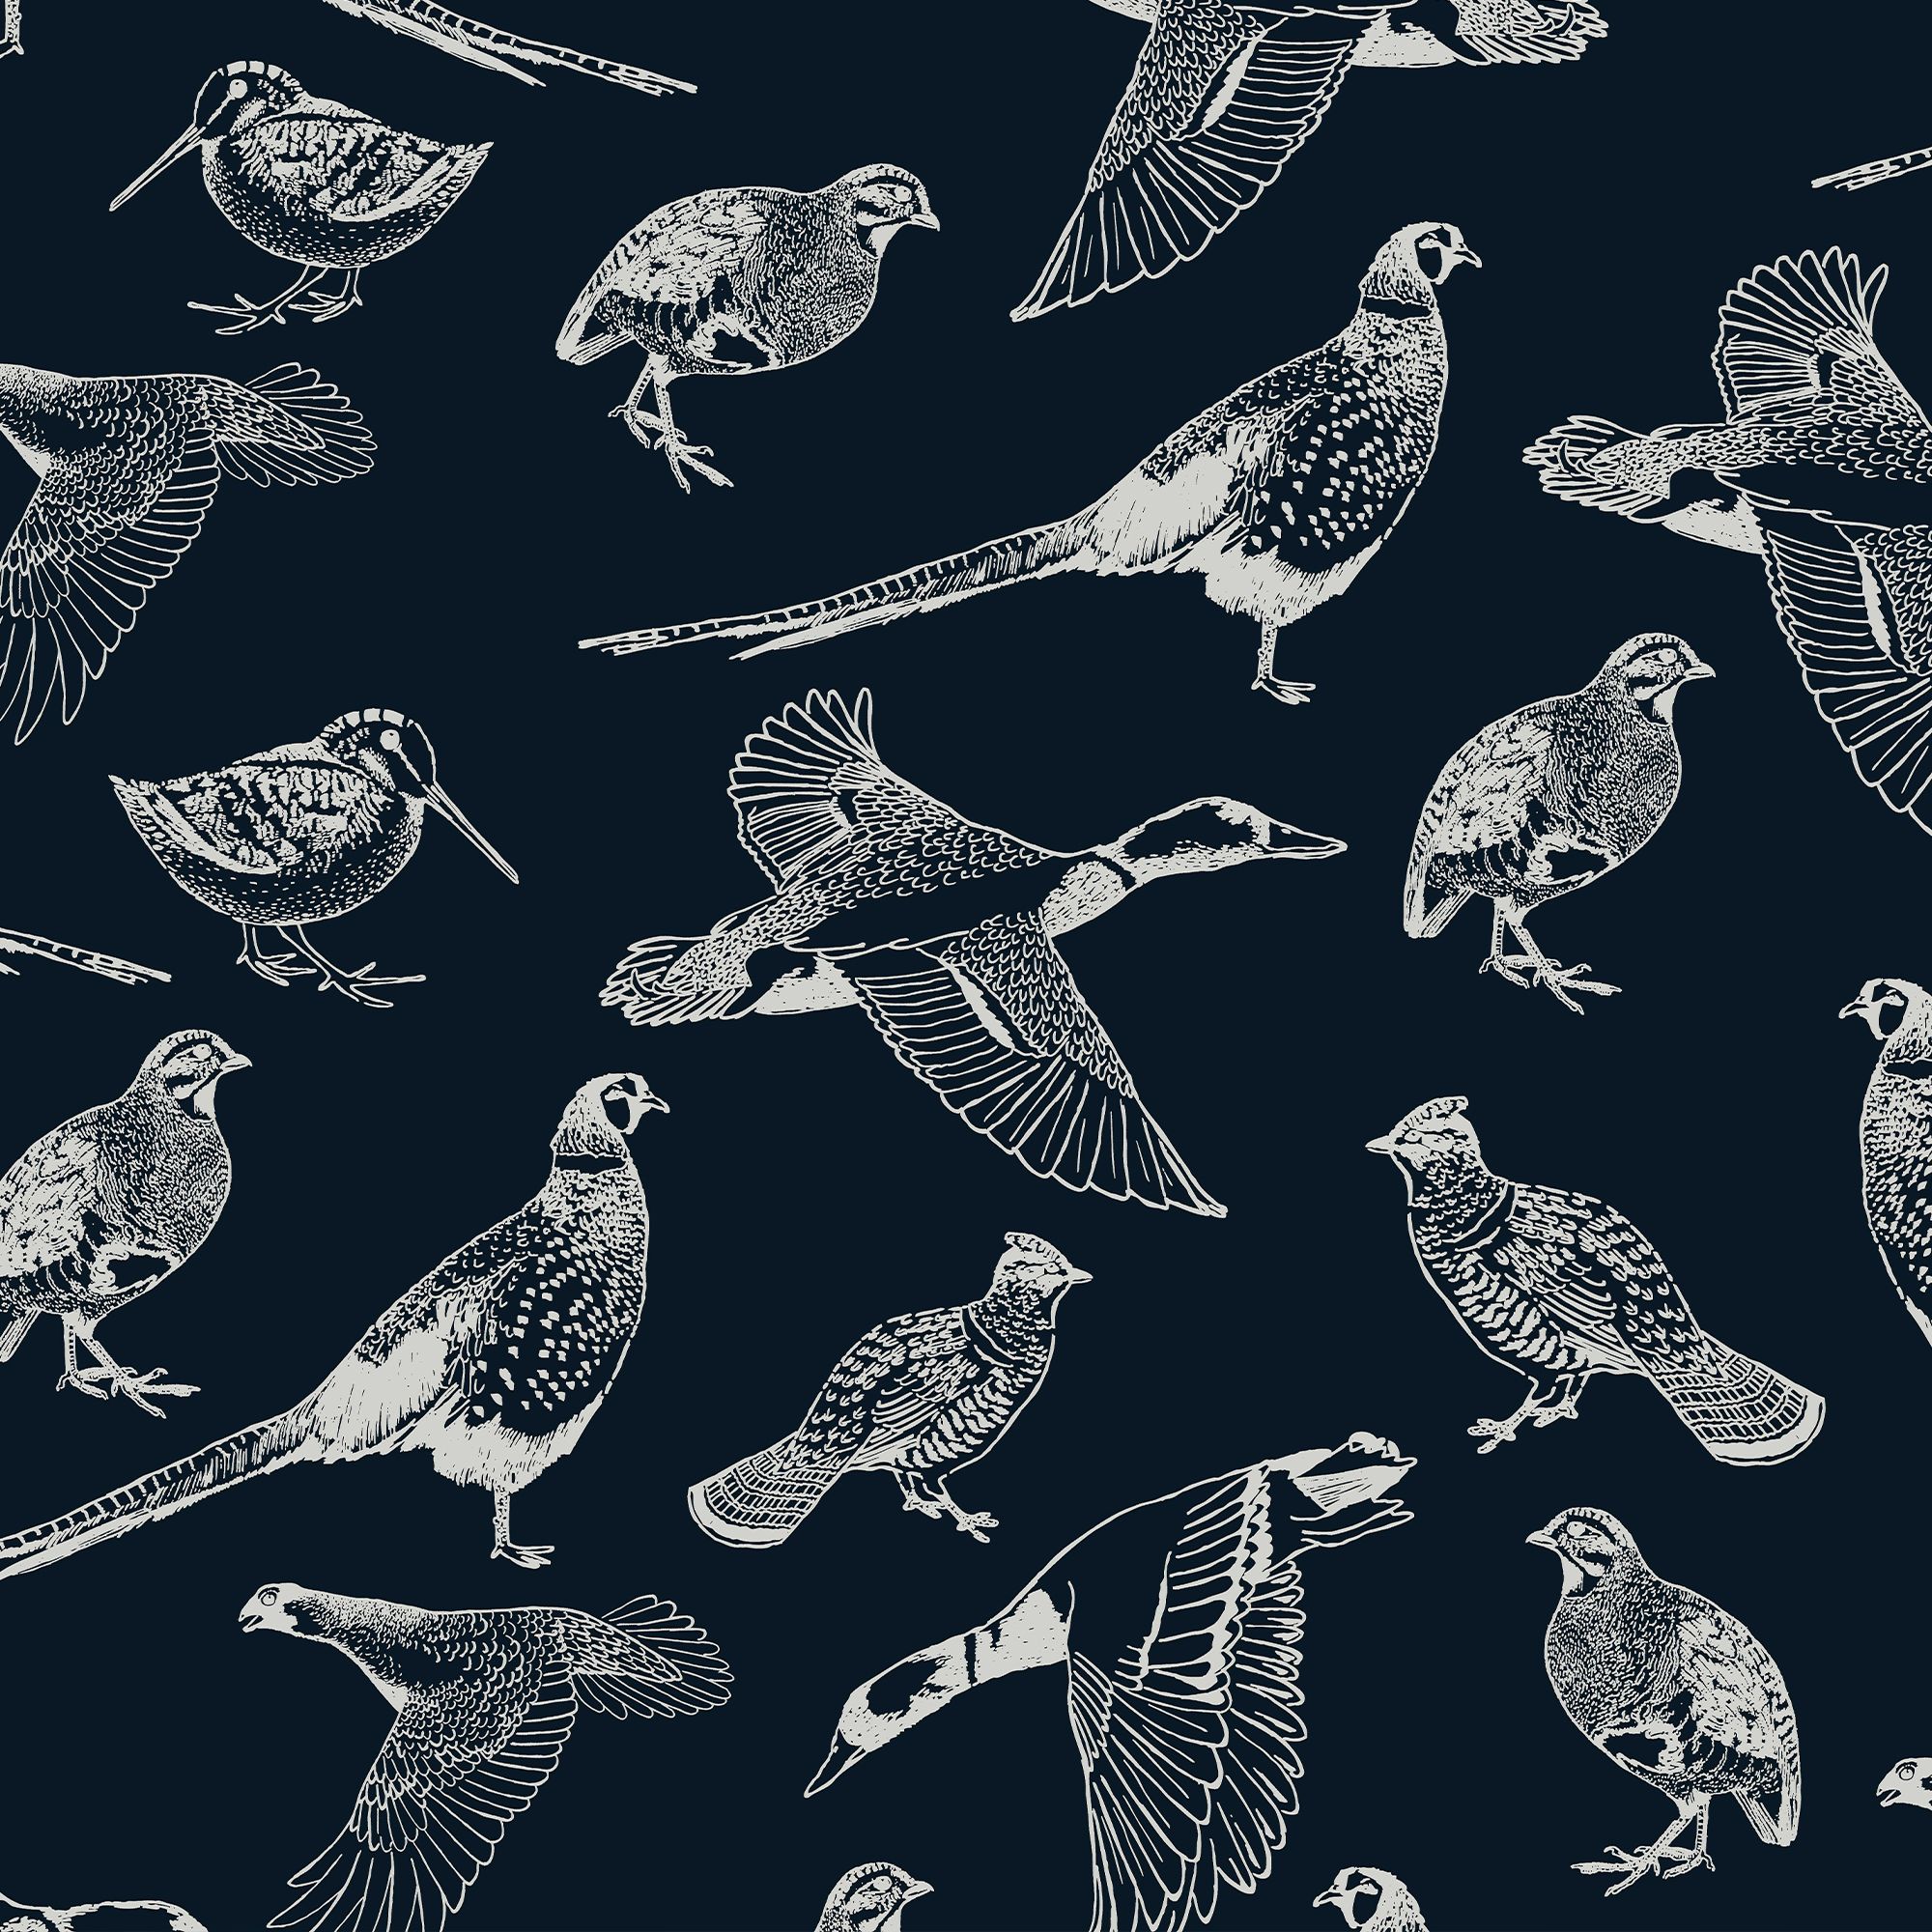 Joules Navy Country birds Smooth Wallpaper